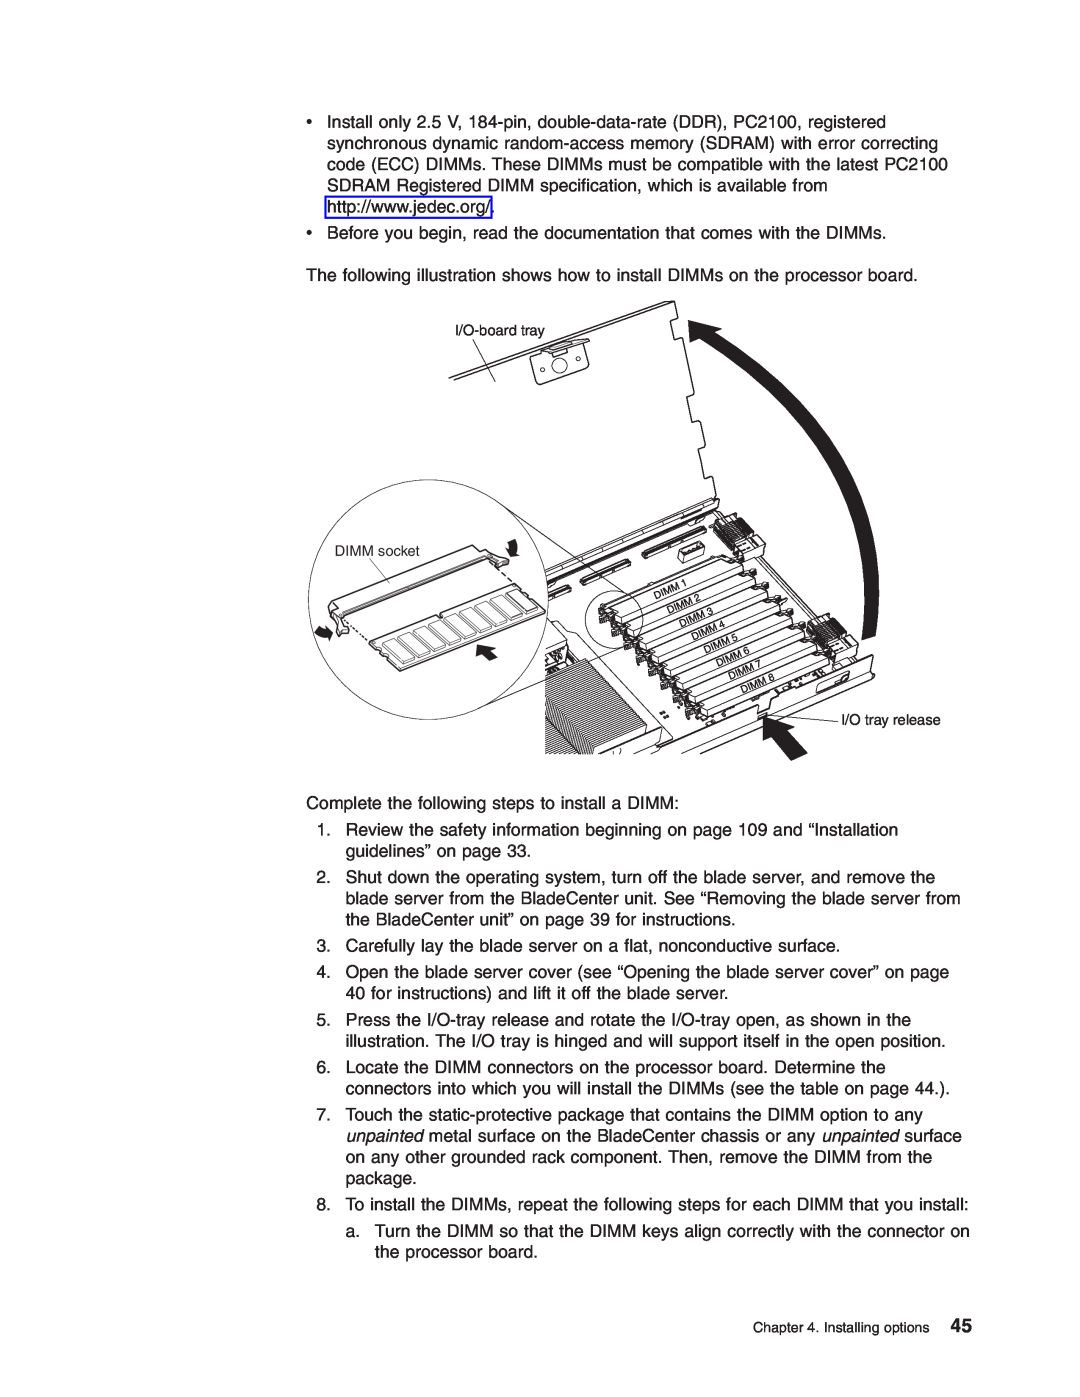 IBM HS40 manual v Before you begin, read the documentation that comes with the DIMMs 